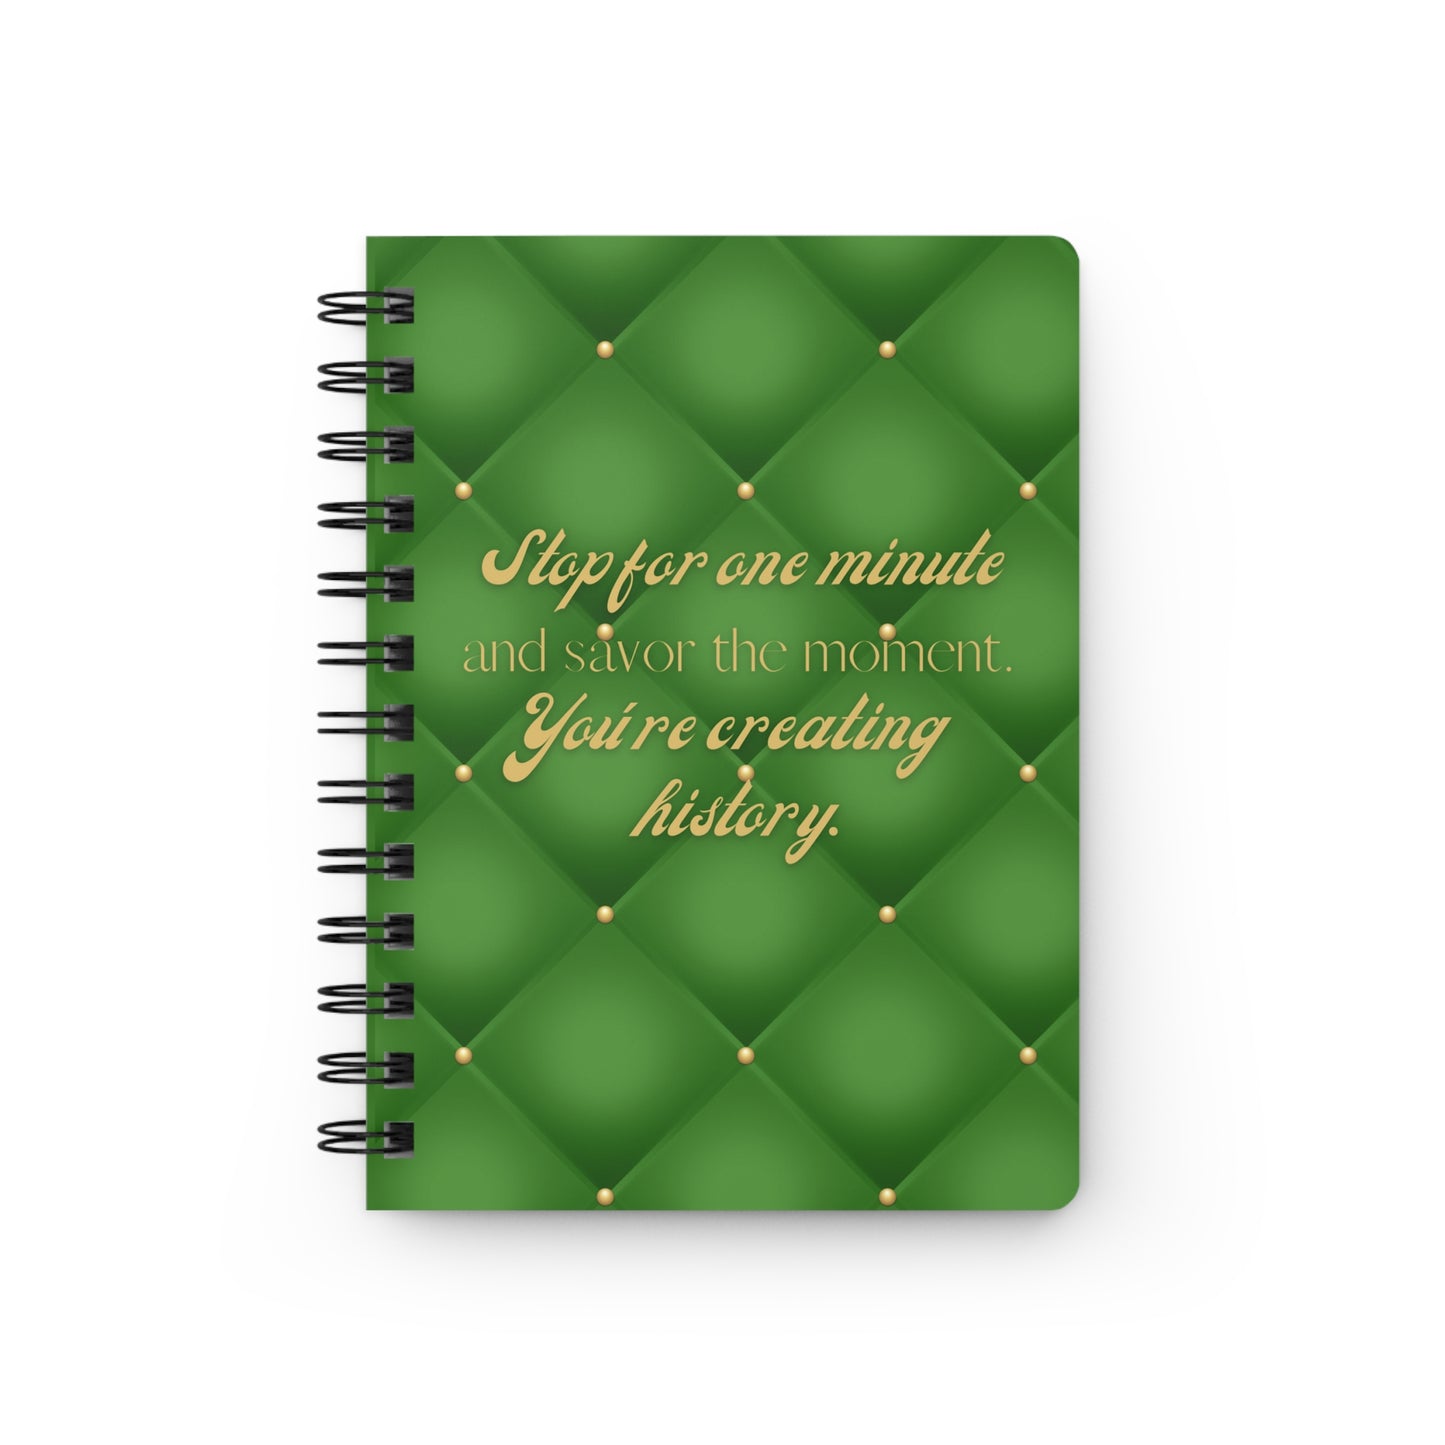 Stop for one minute Tufted Print Green and Gold Spiral Bound Journal